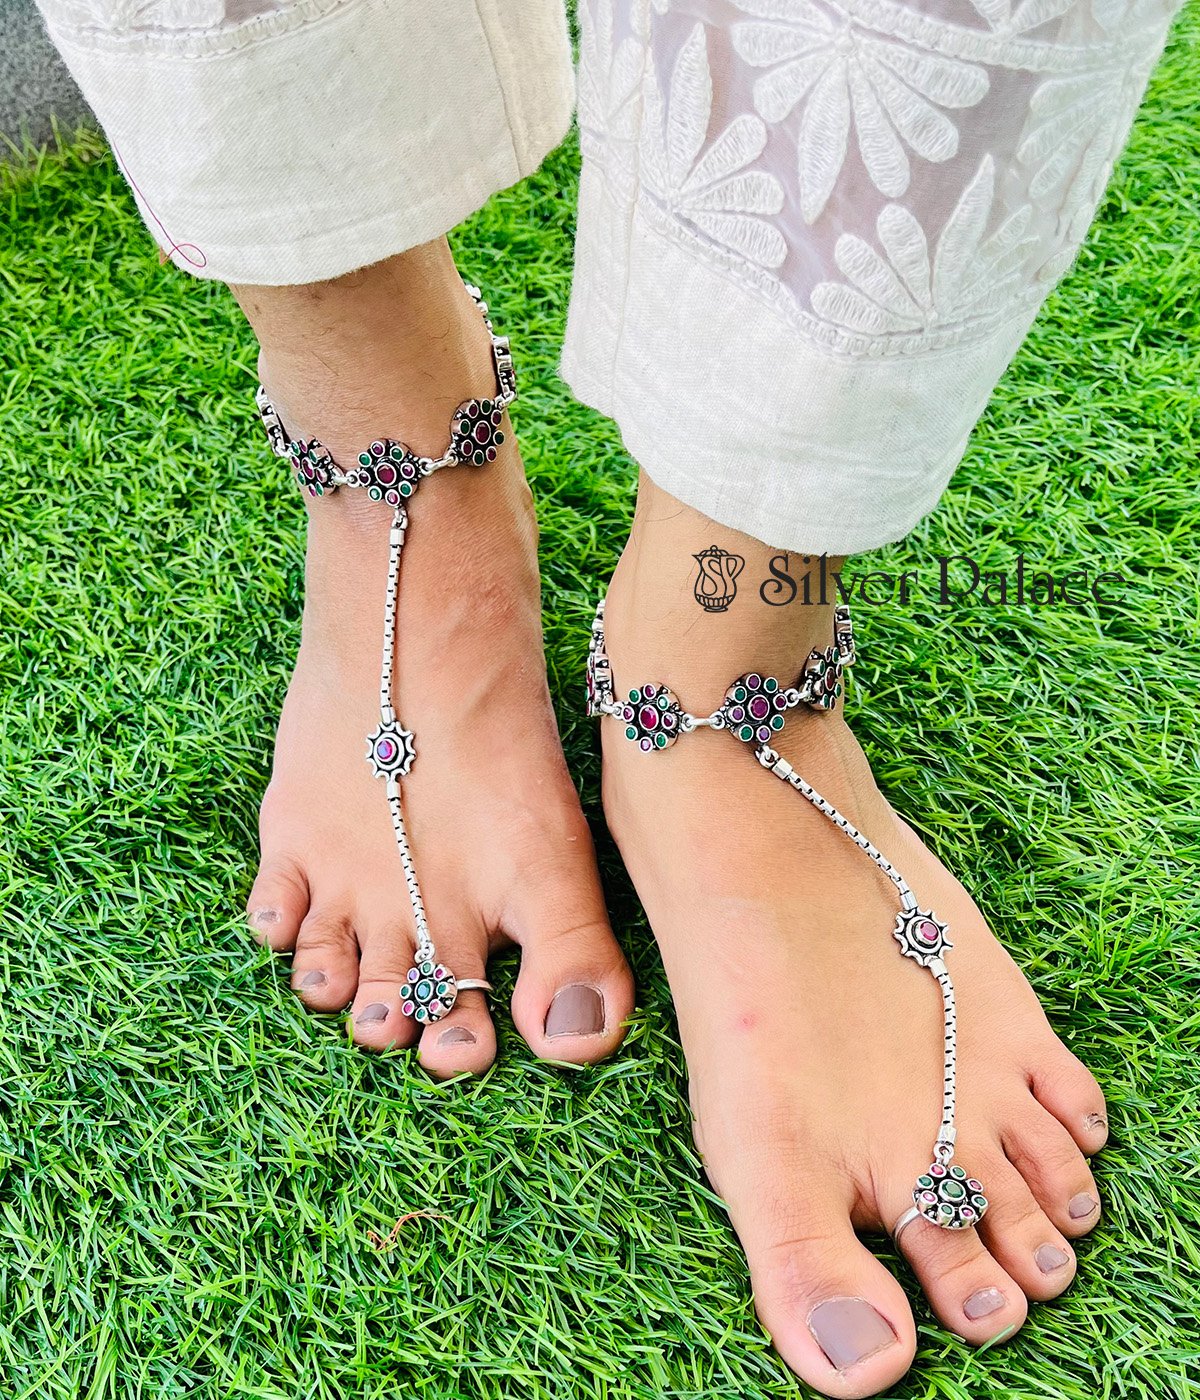 92.5 ANTIQUE OXIDISED SILVER ANKLETS